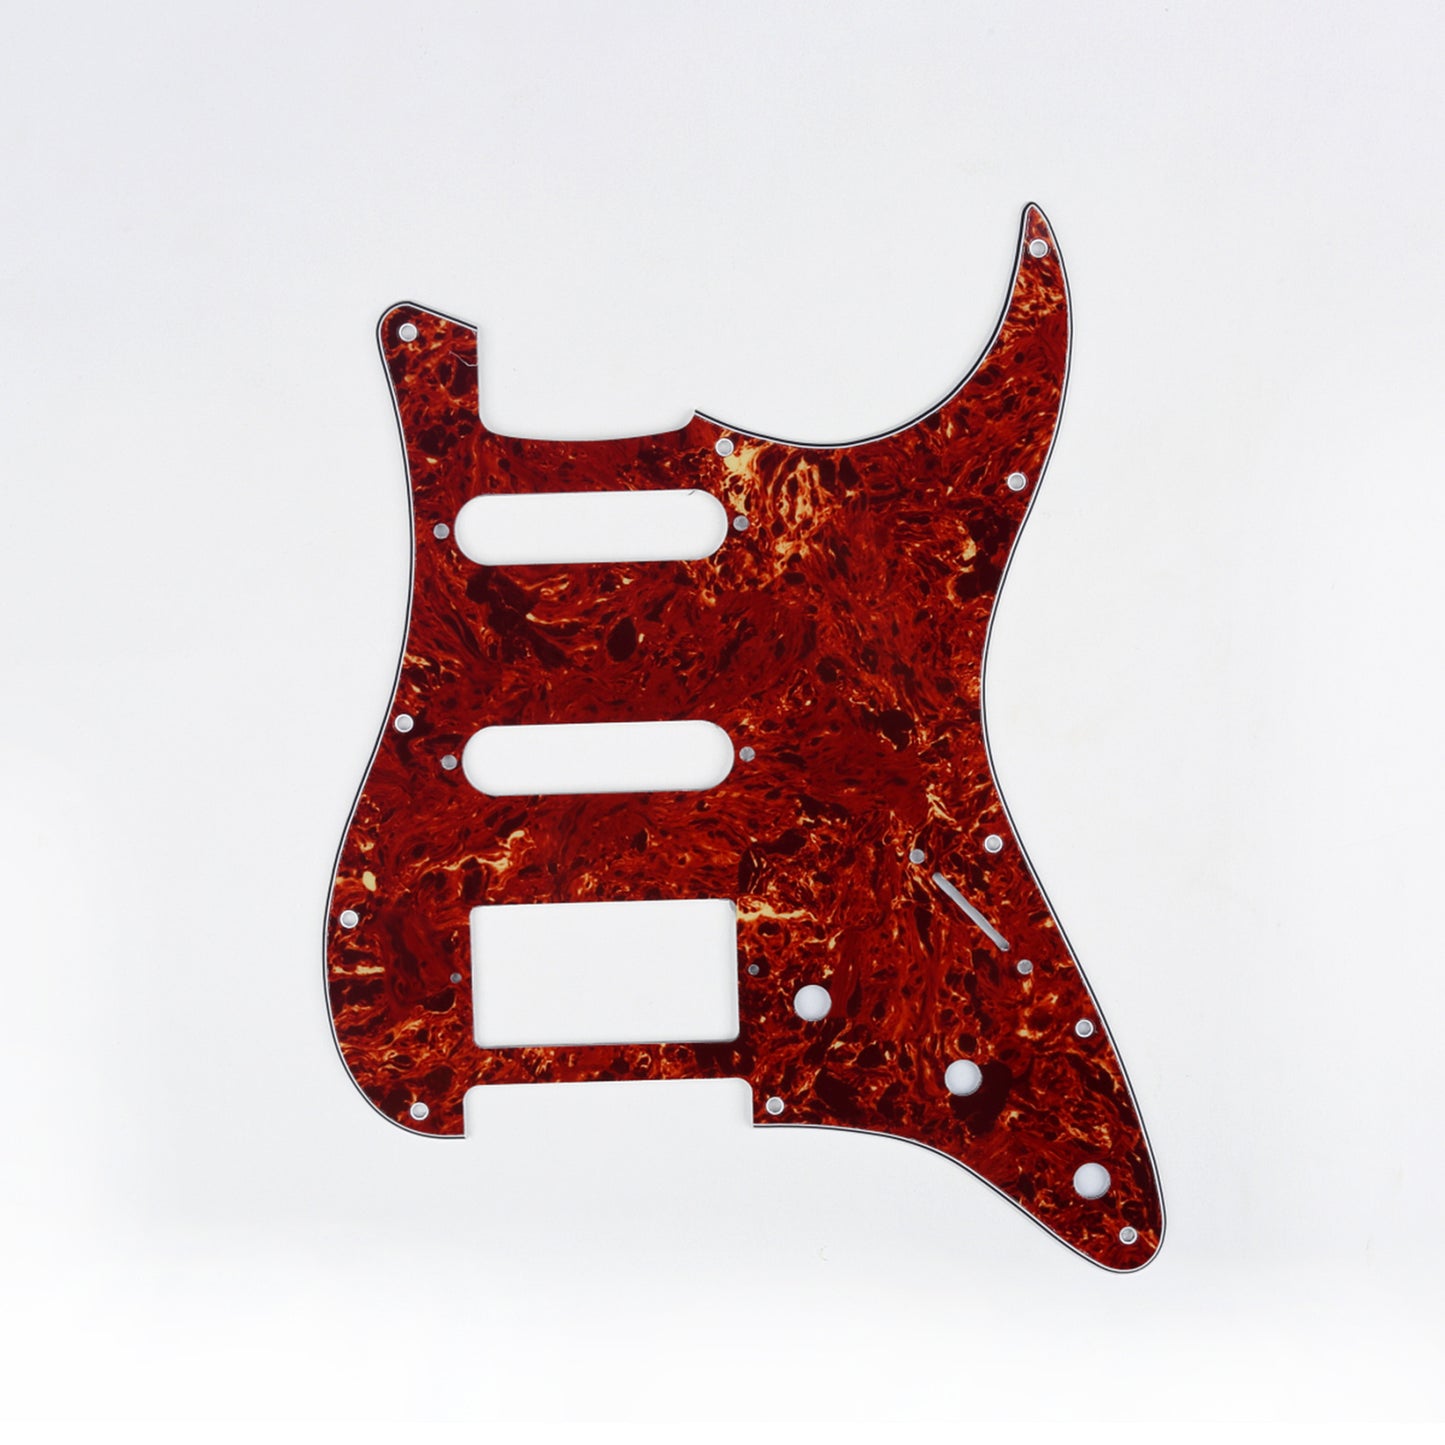 Musiclily HSS 11 Hole Guitar Strat Pickguard for Fender USA/Mexican Made Standard Stratocaster Modern Style,  4Ply Vintage Tortoise